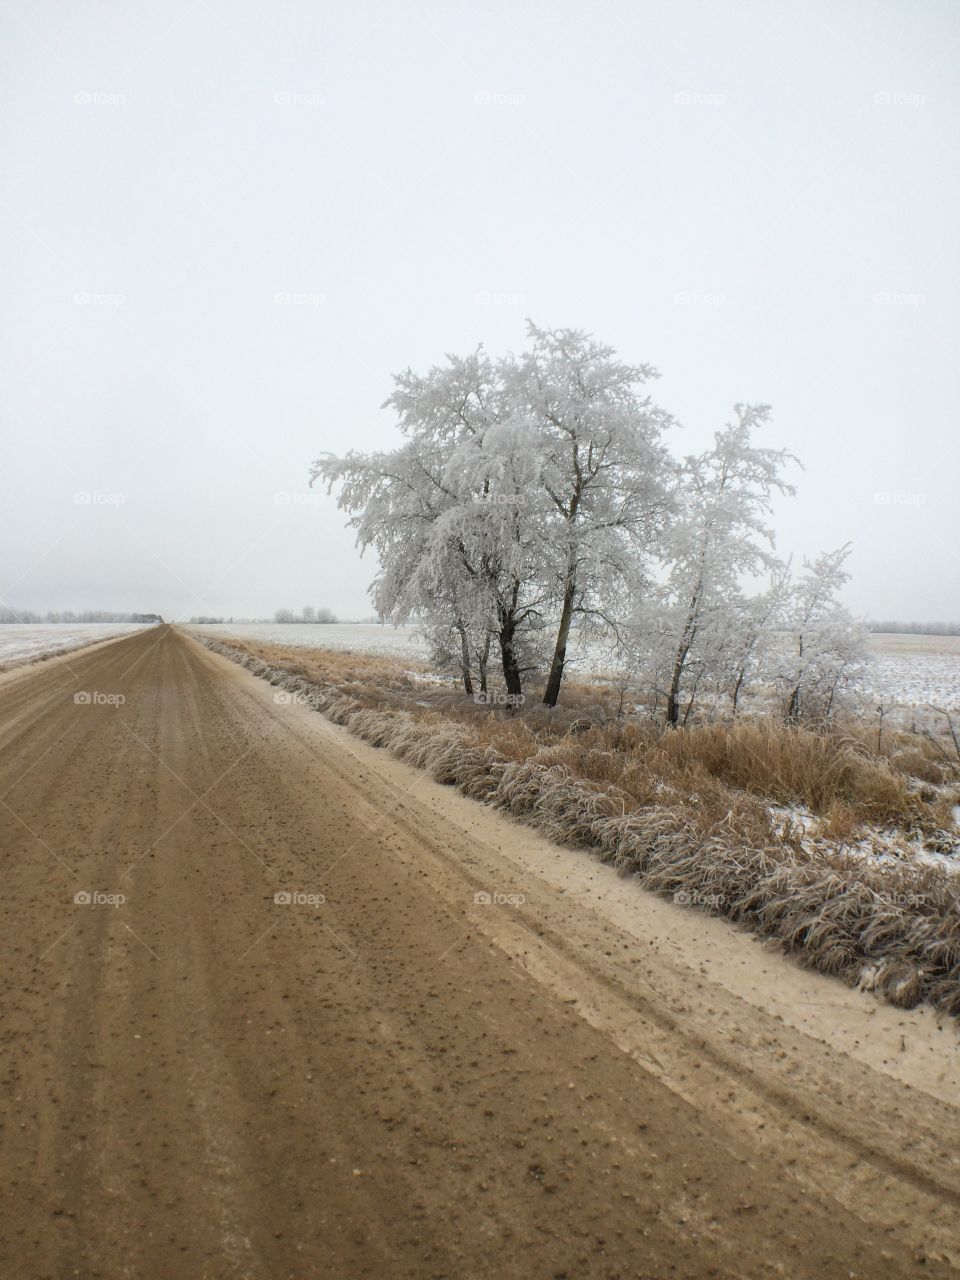 Hoar frost covering the trees beside the road on a grey day